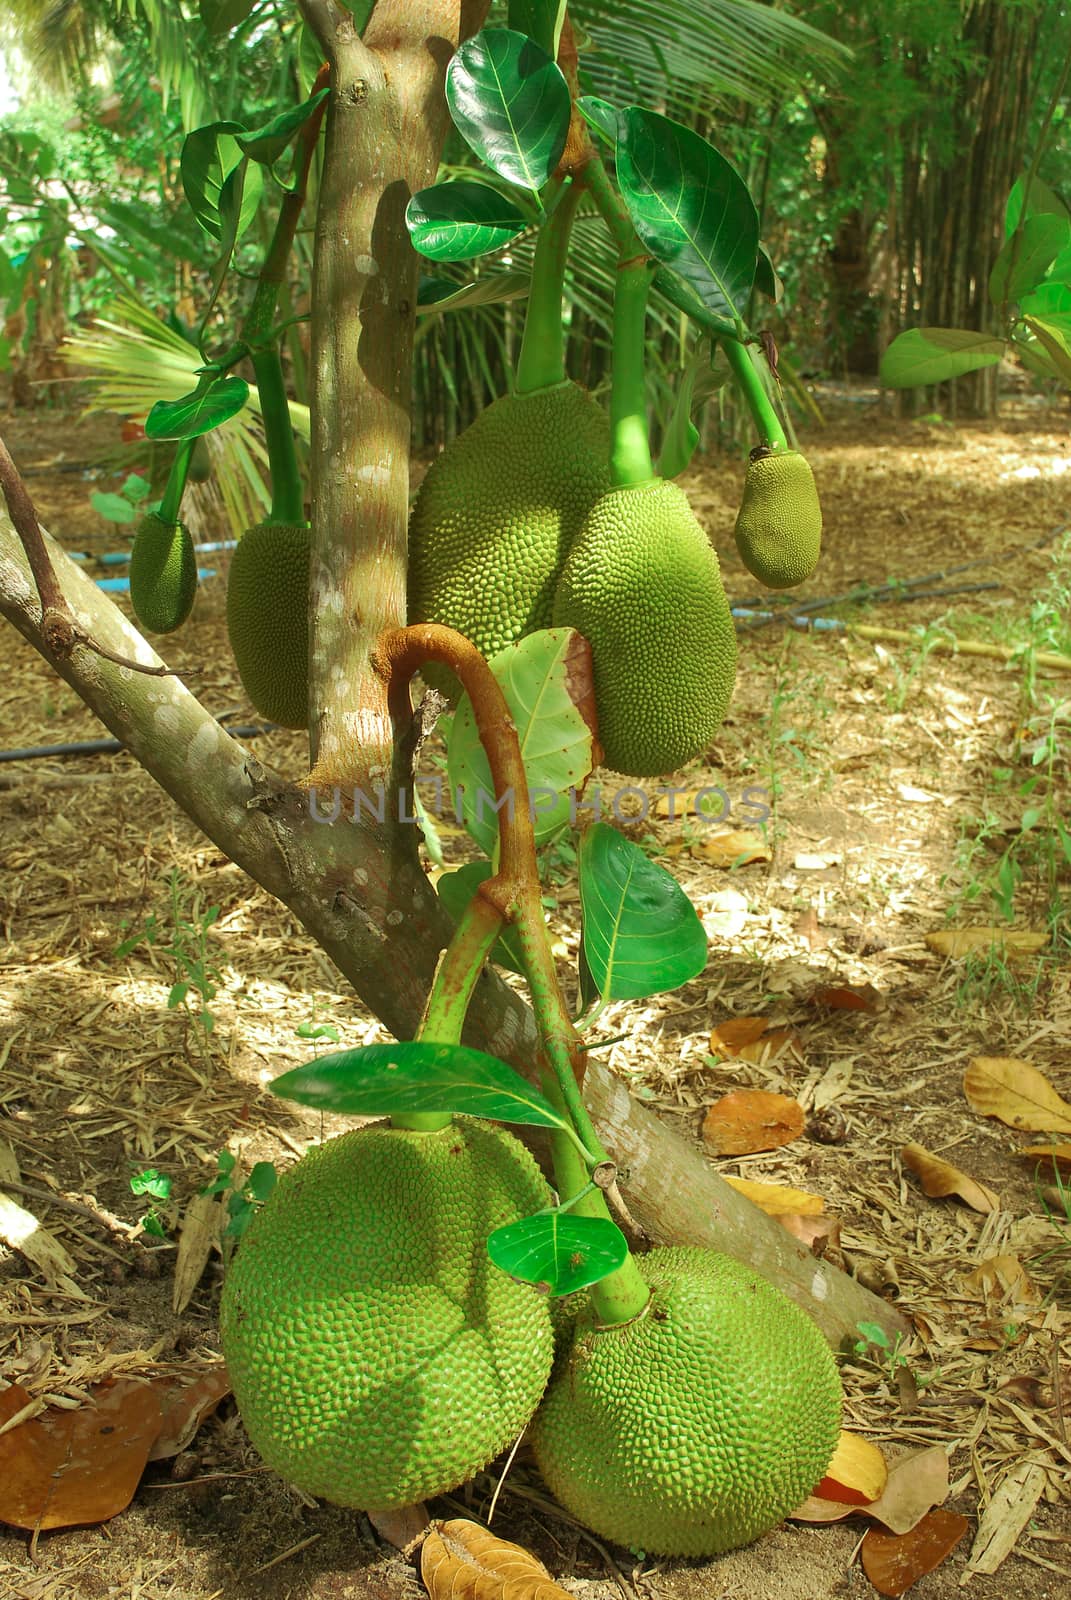 The jackfruit tree of this species of Thailand is very productive.